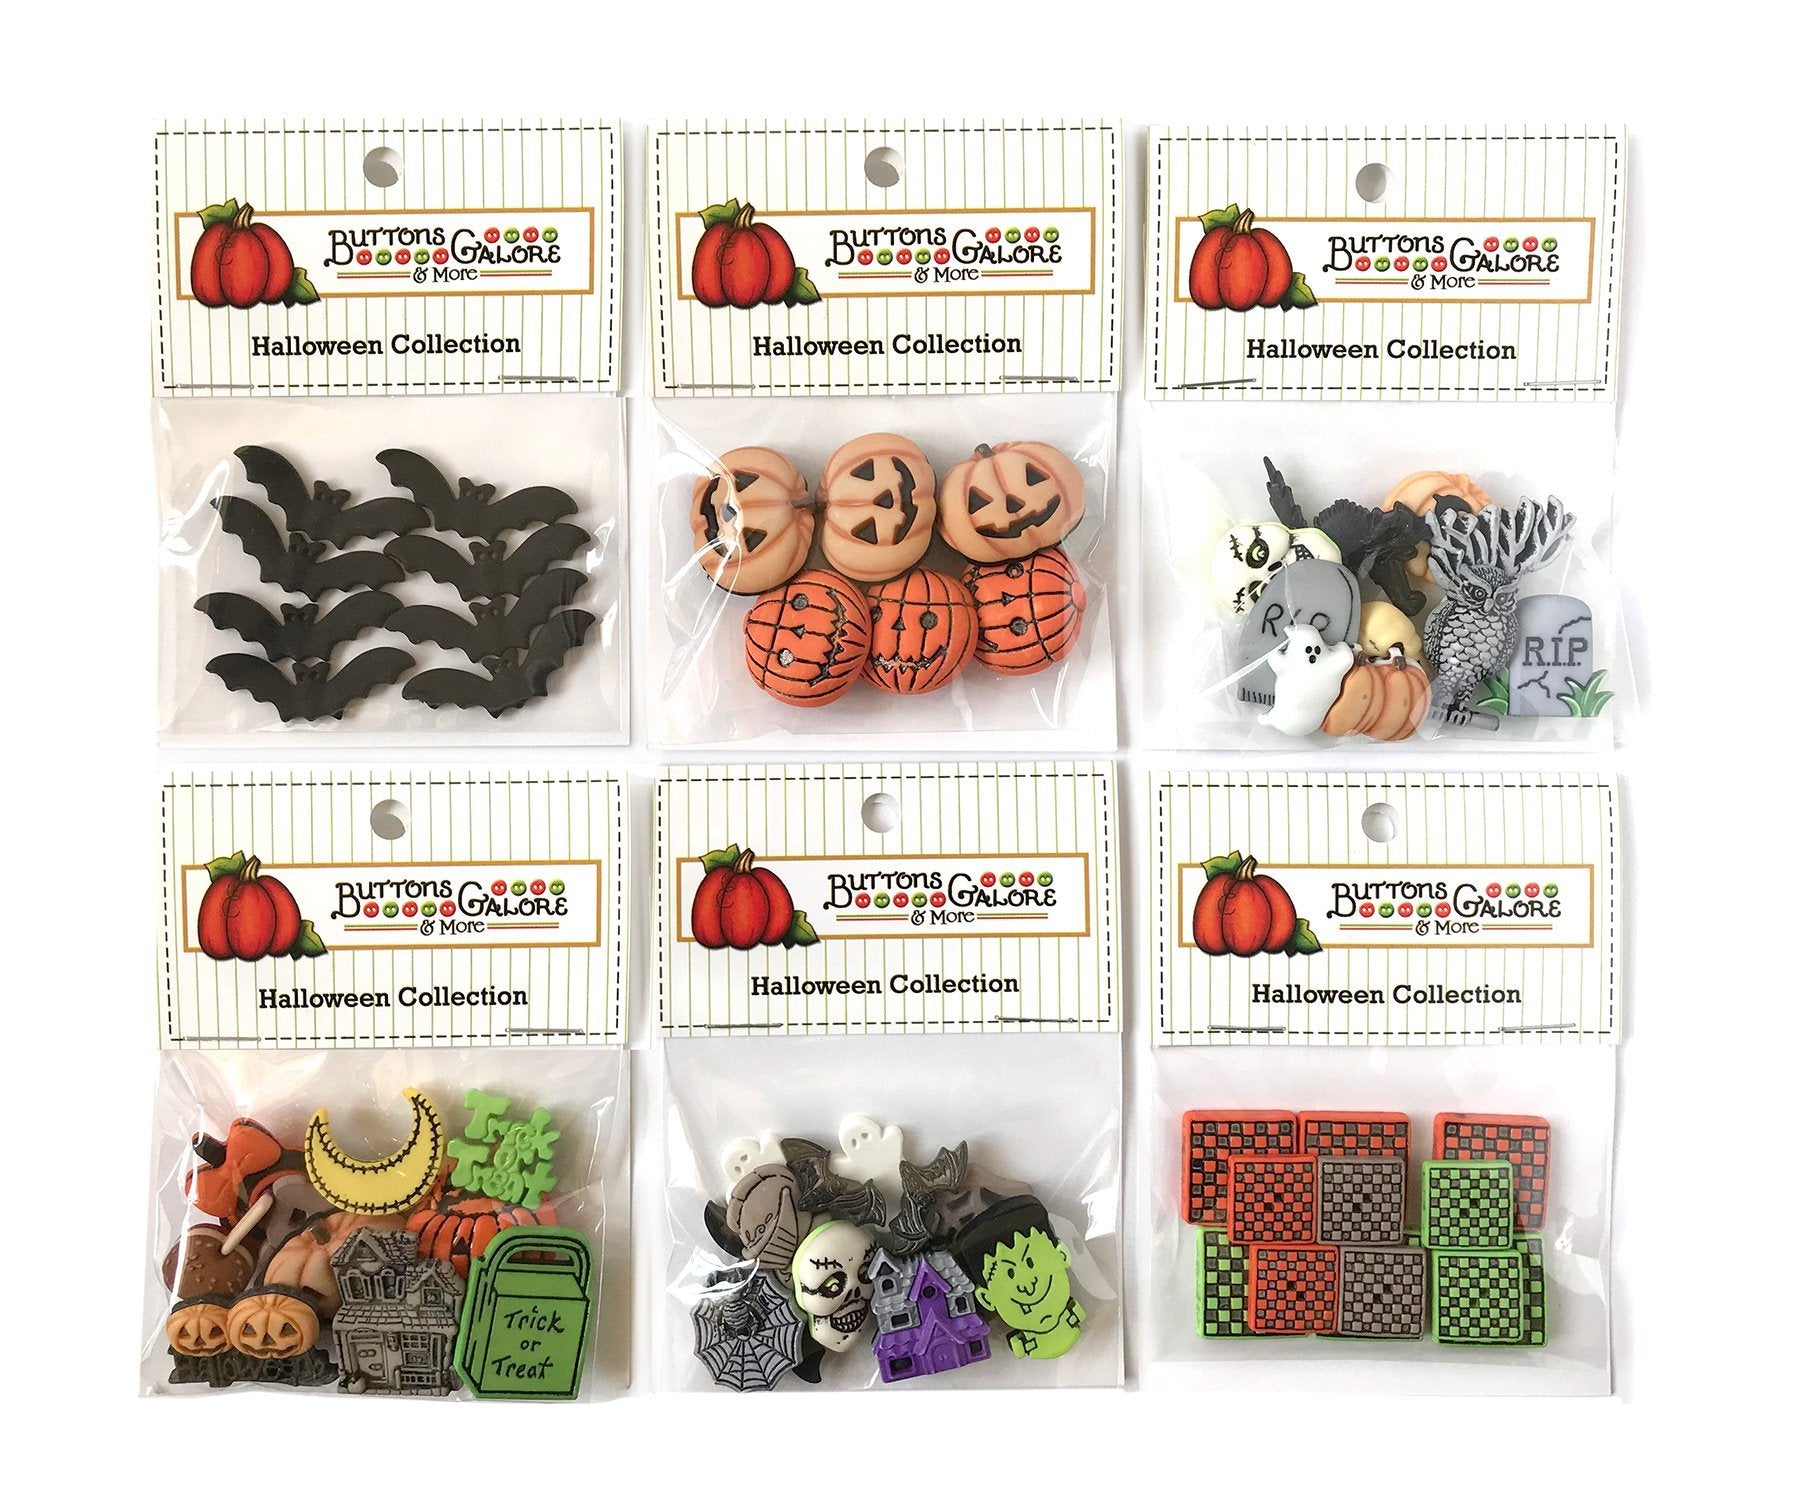 Halloween Group 2 -Set of 6 - Buttons Galore and More